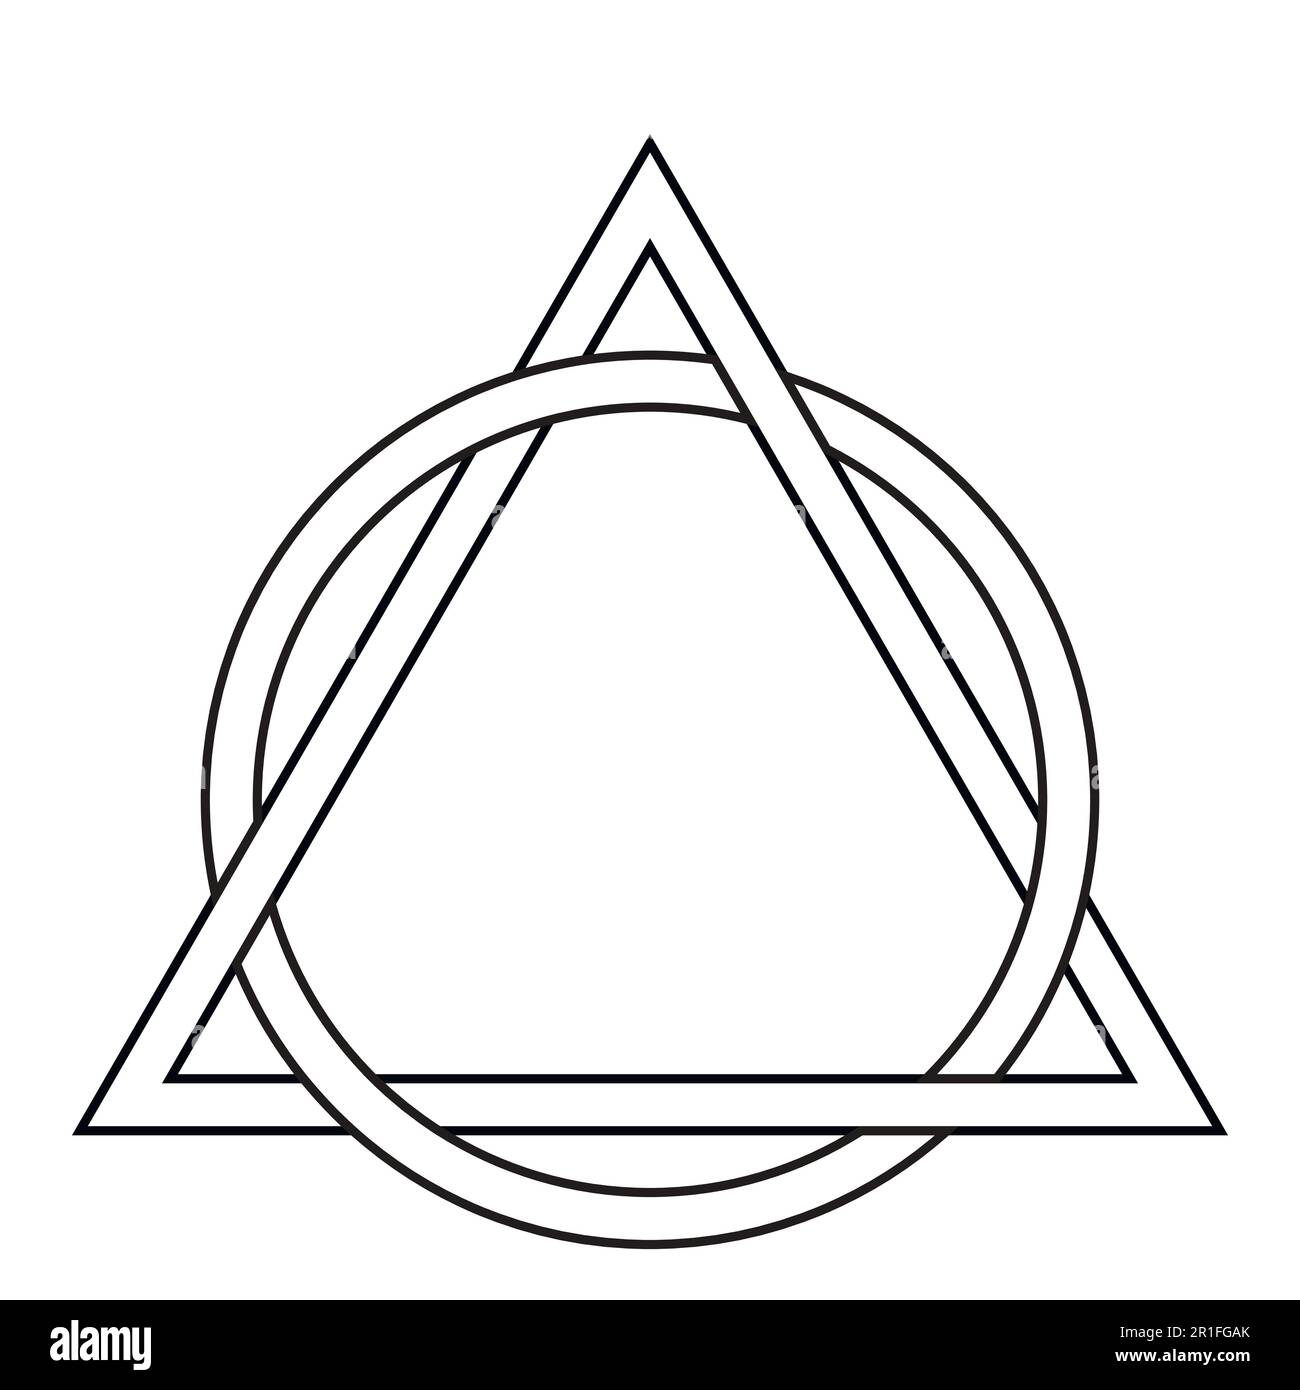 circle weave triangle tattoo Stock Vector